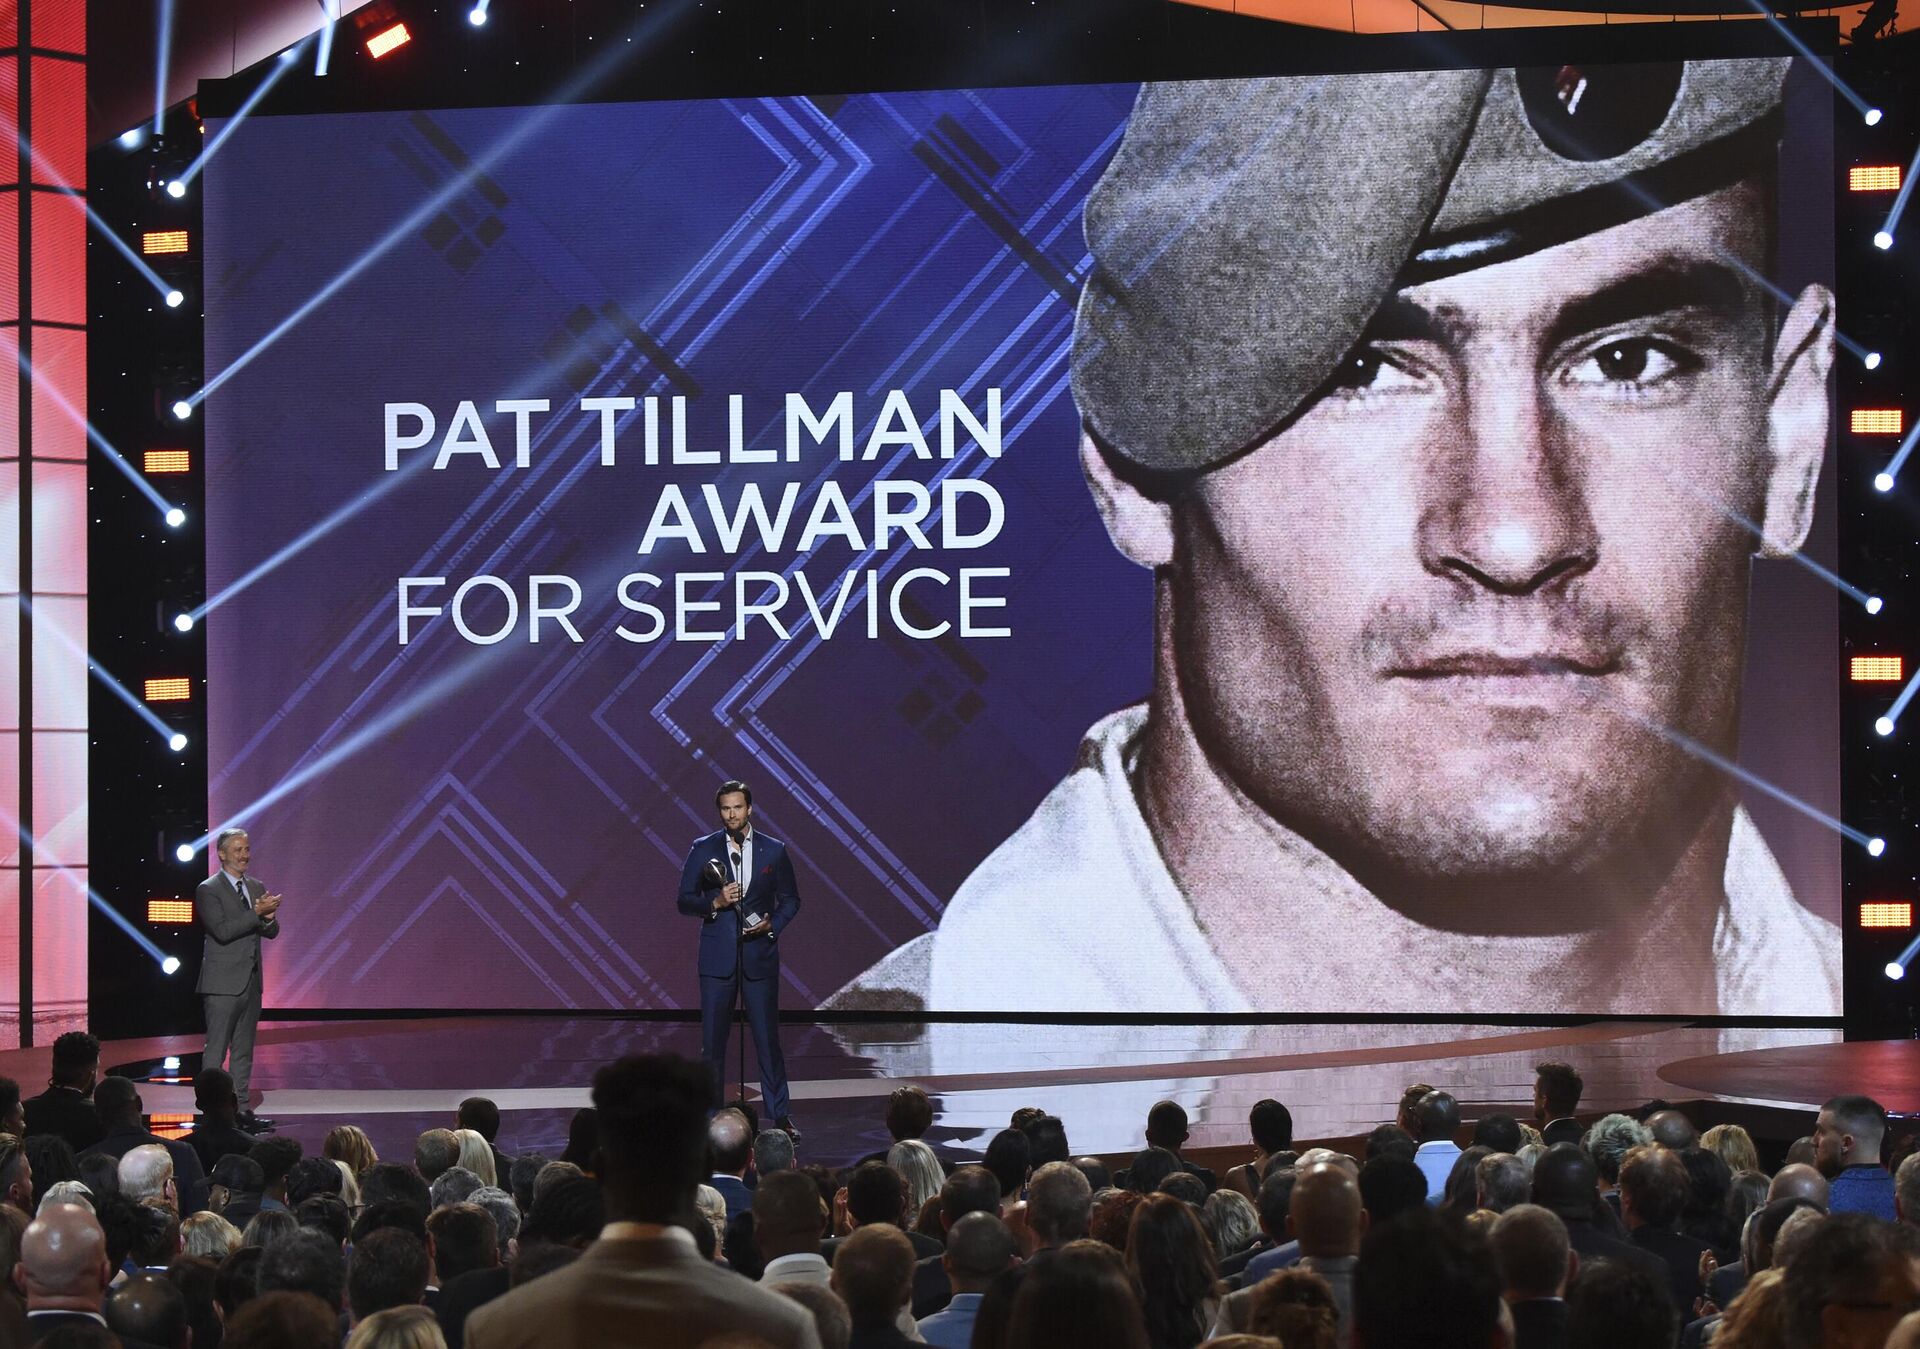 Former Marine Sgt. Jake Wood accepts the Pat Tillman award for service at the ESPY Awards in Los Angeles. Pat's Run annually draws 30,000 people to run in honor former NFL player and soldier Pat Tillman. The coronavirus pandemic forced organizers join several other races in shifting it to a virtual event. (Photo by Phil McCarten/Invision/AP, File) - Sputnik International, 1920, 14.02.2023